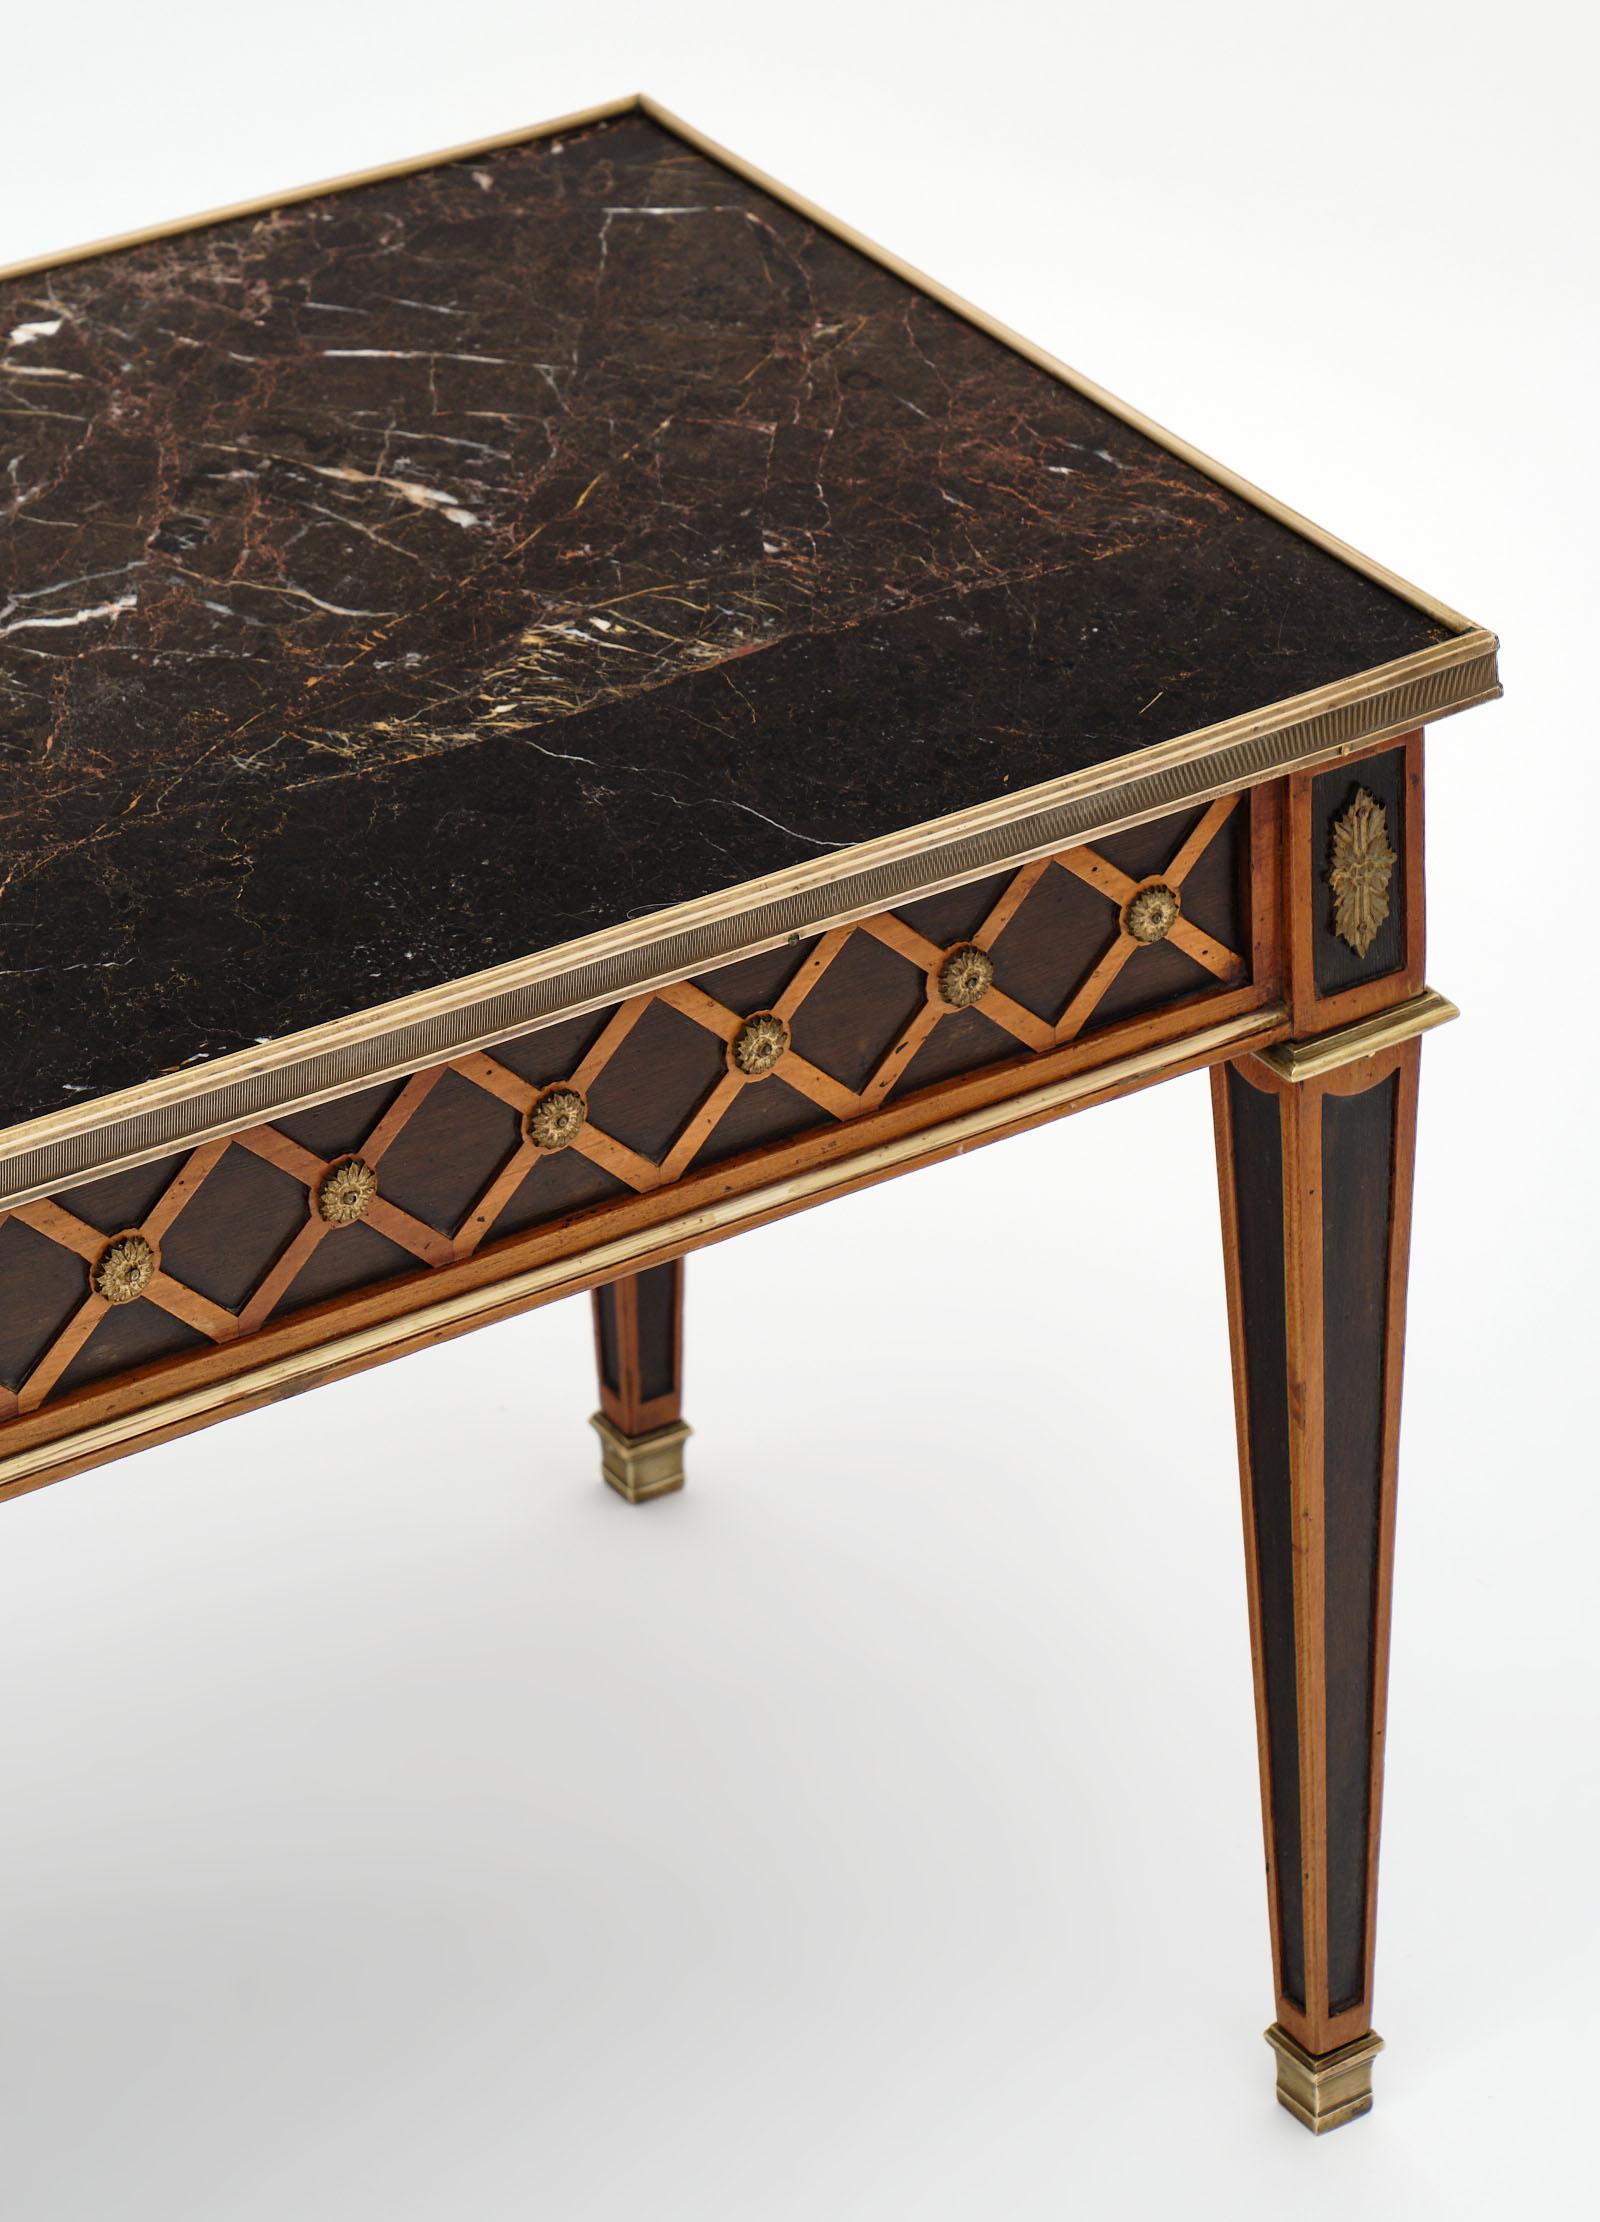 Gilt Louis XVI Style French Marble-Topped Coffee Table For Sale